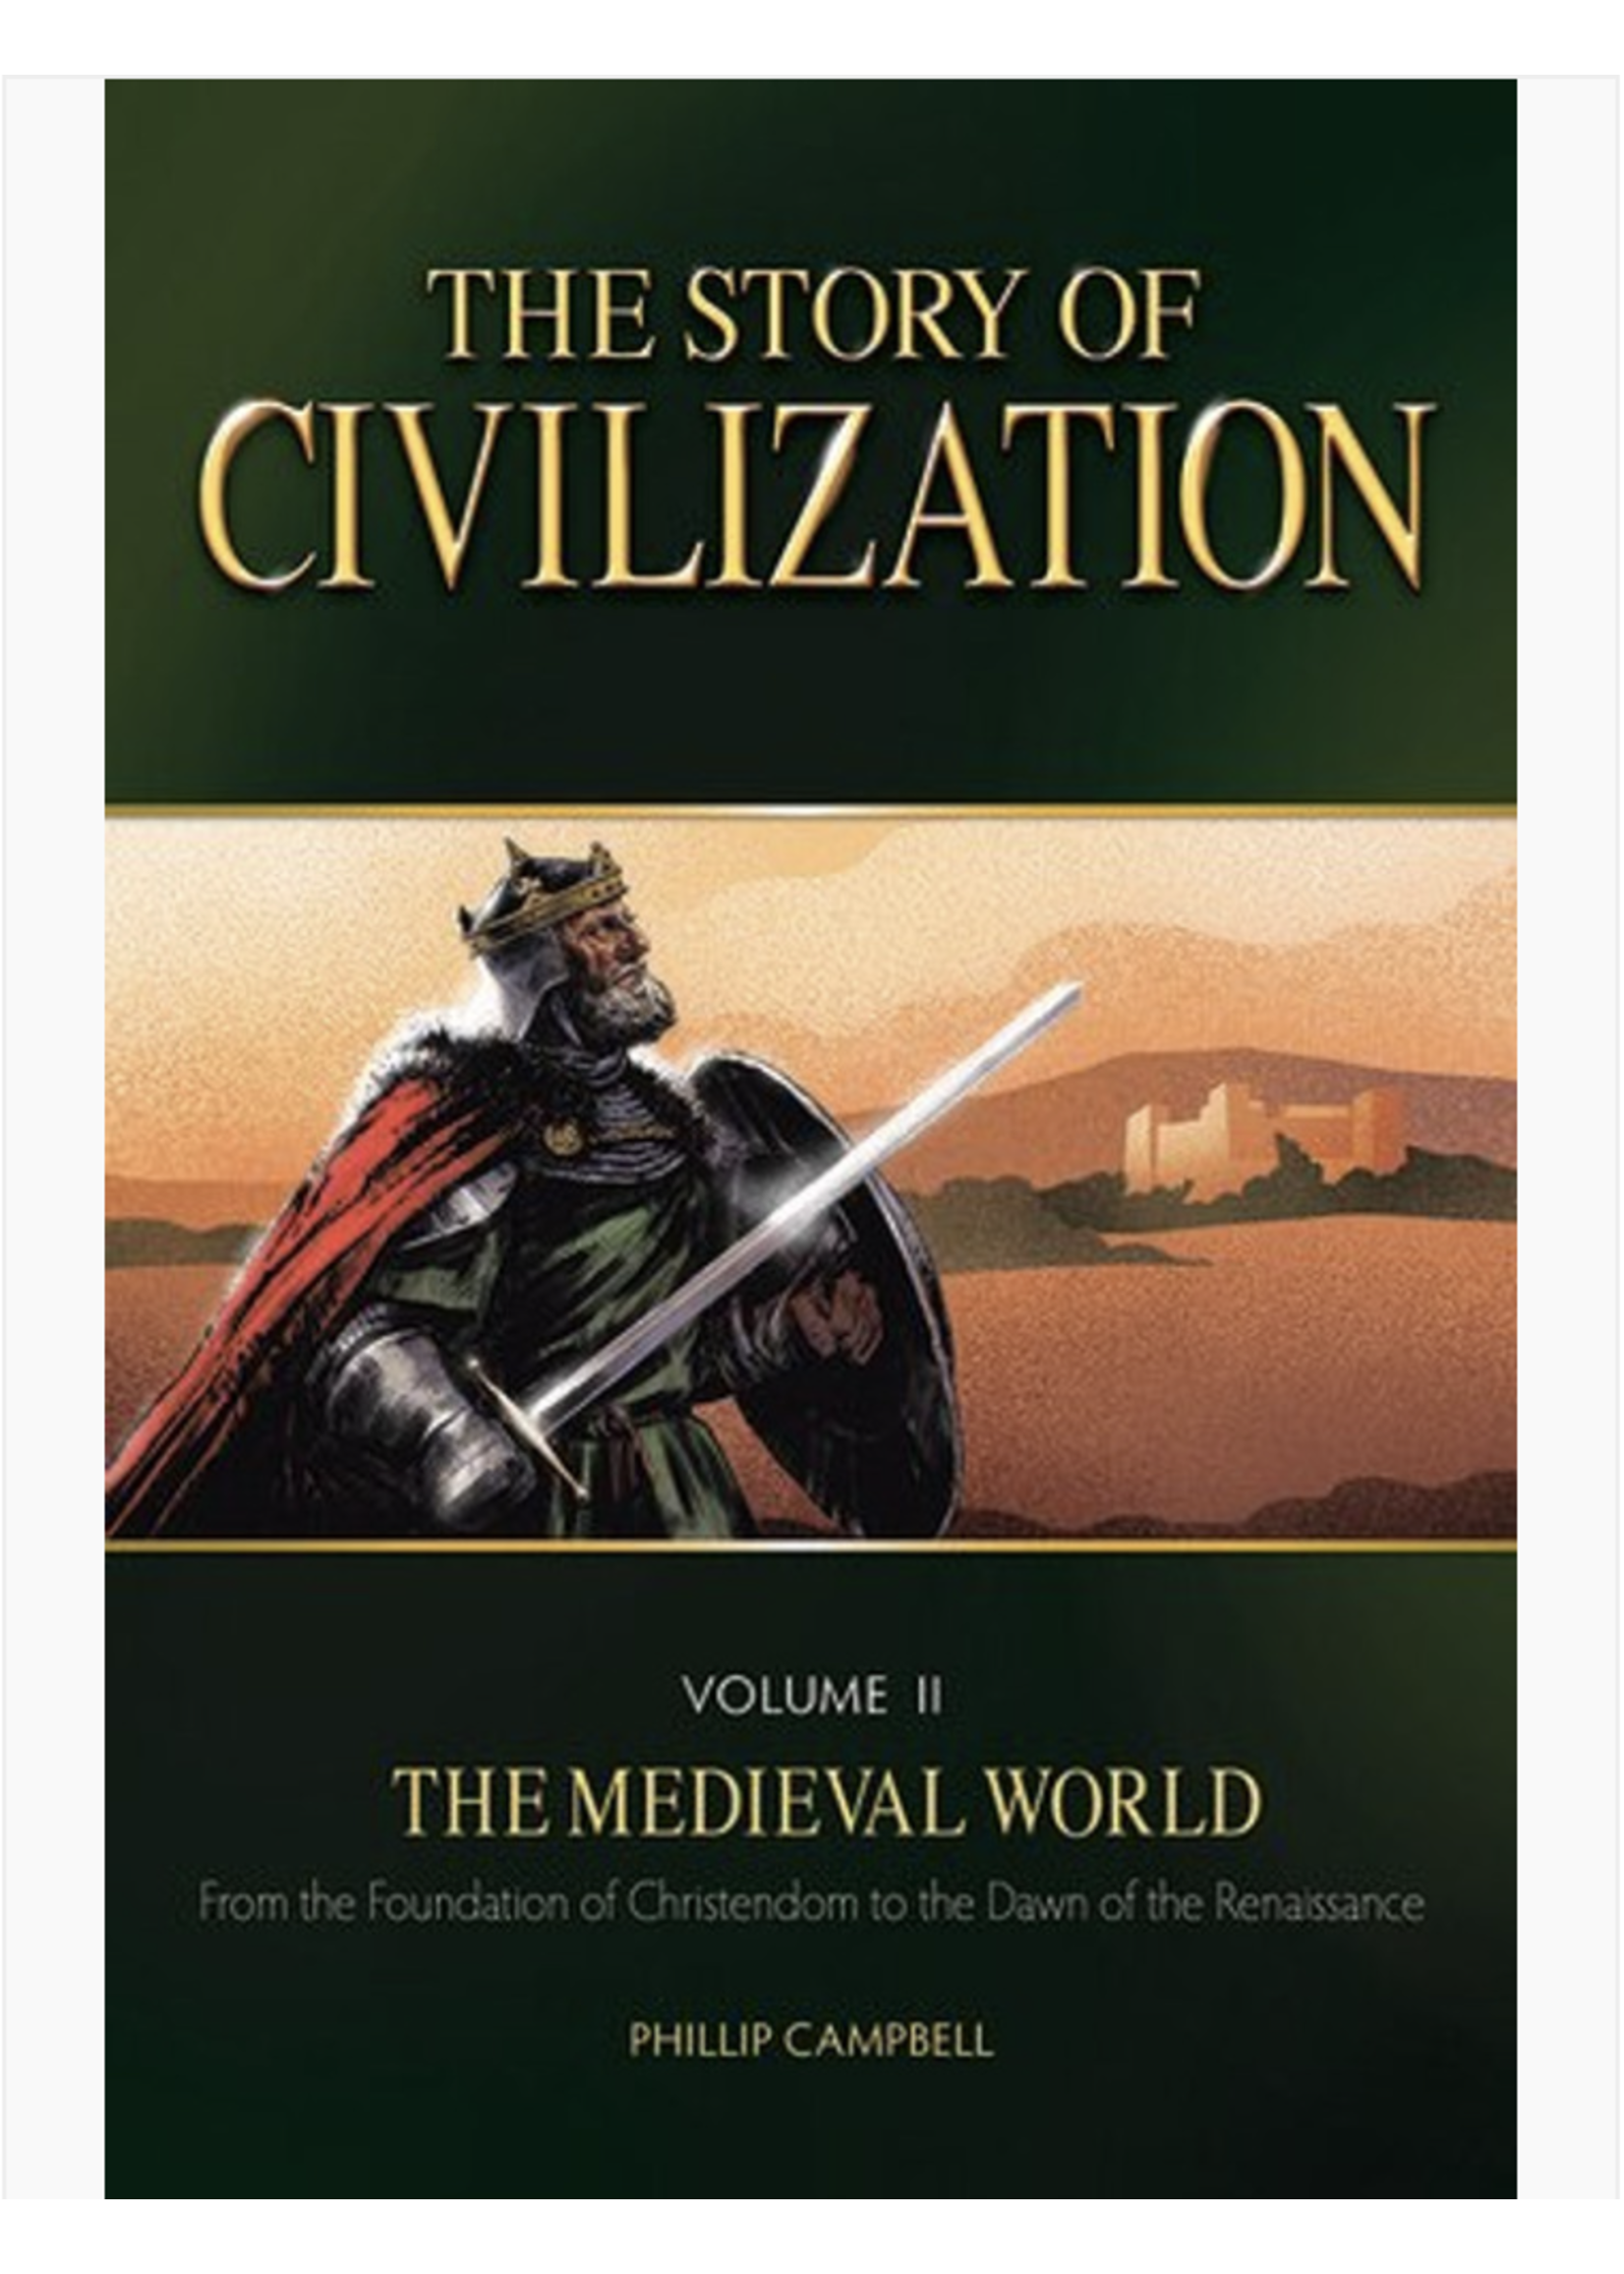 TAN Books The Story of Civilization Volume II: The Medieval World